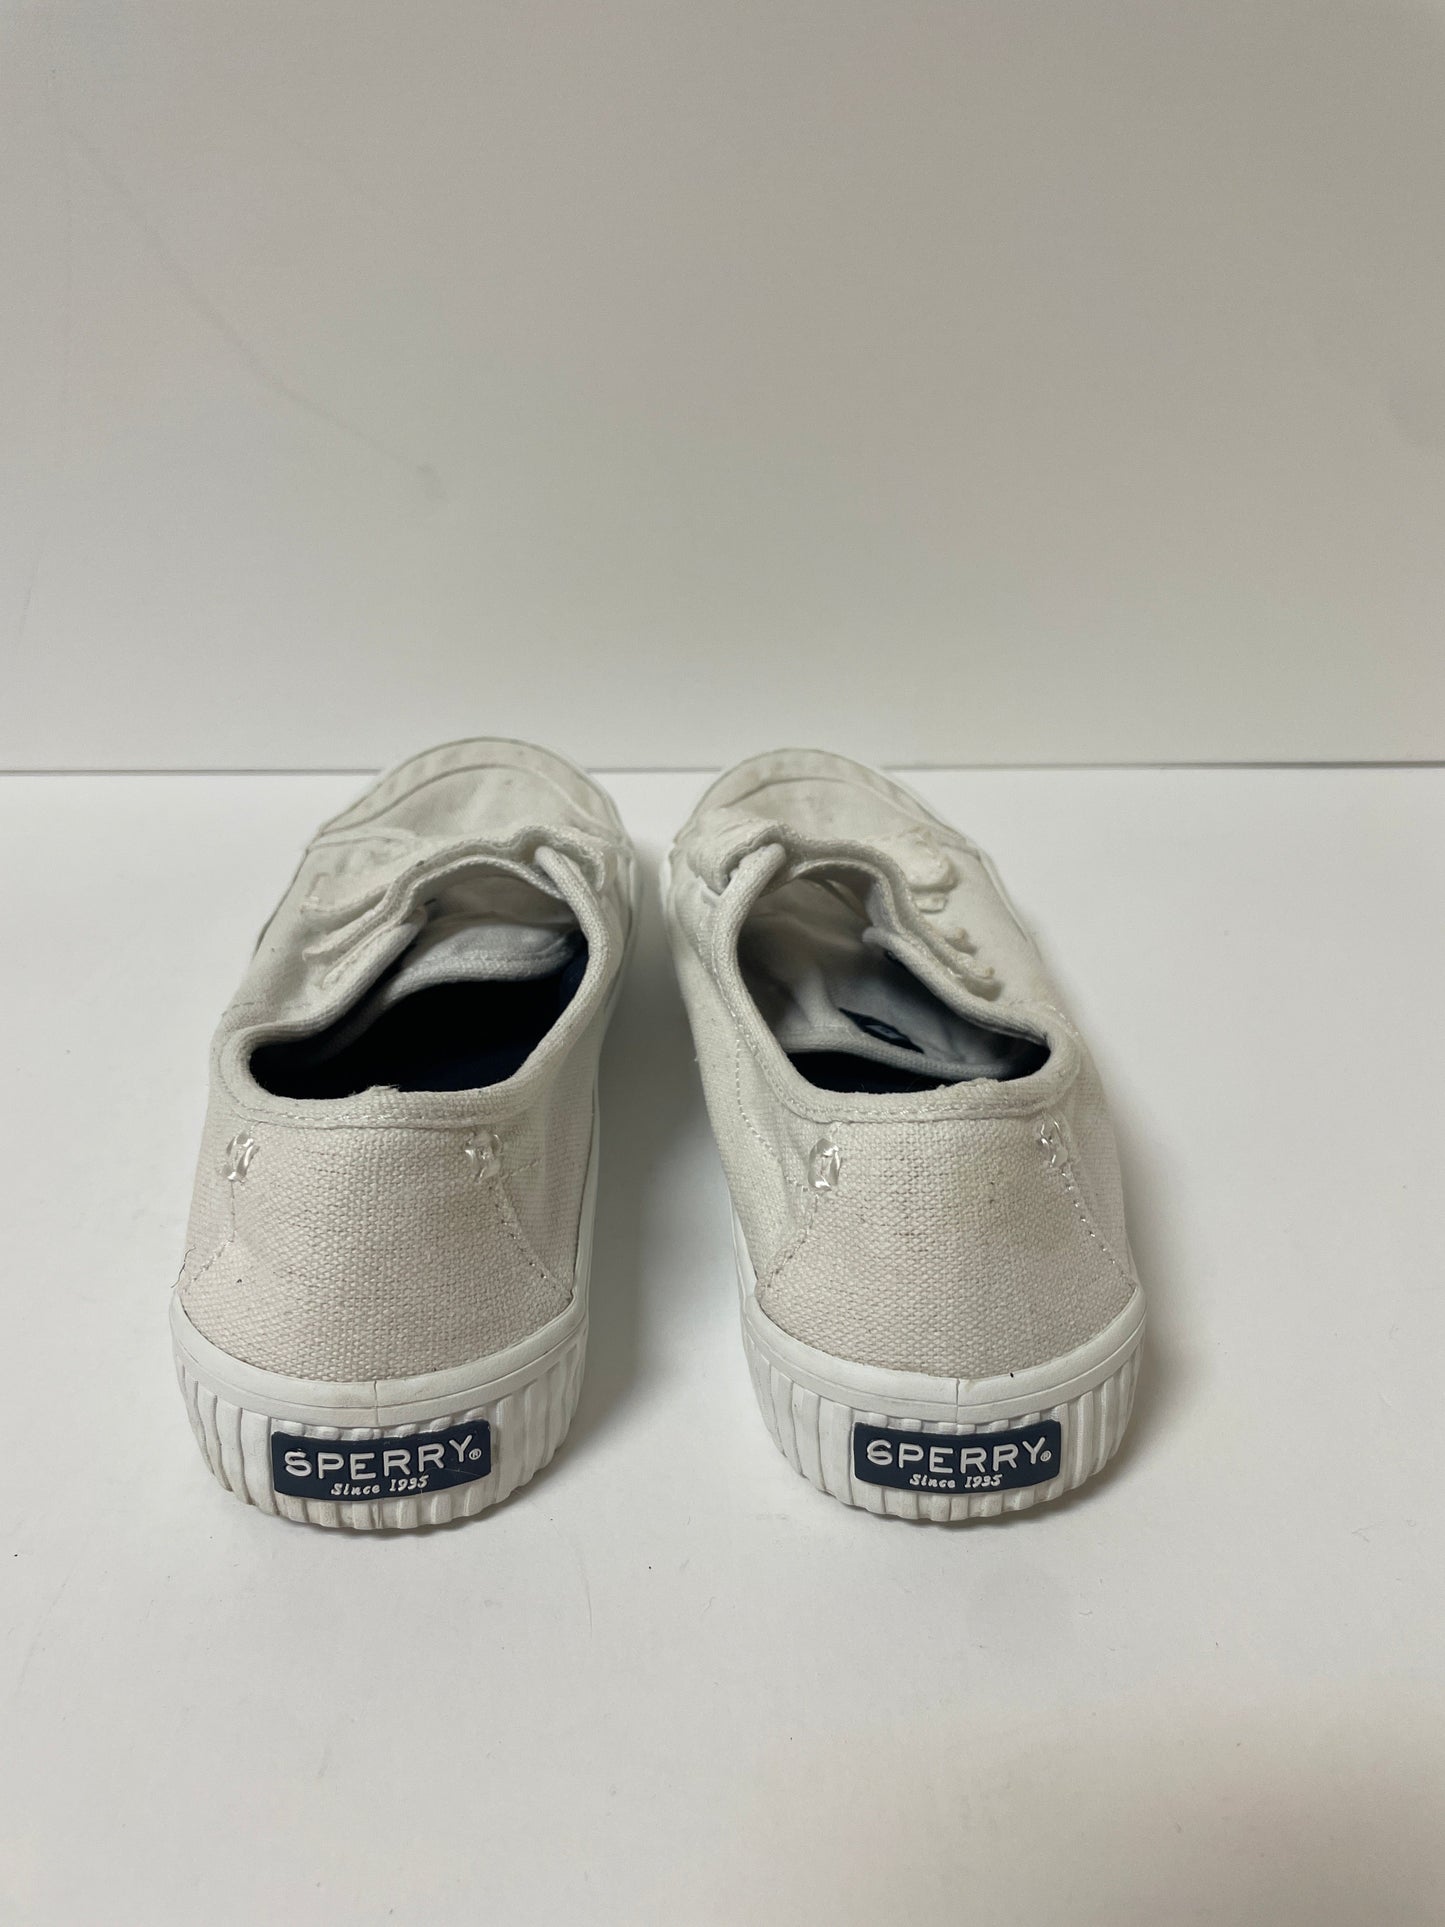 Shoes Sneakers By Sperry  Size: 8.5